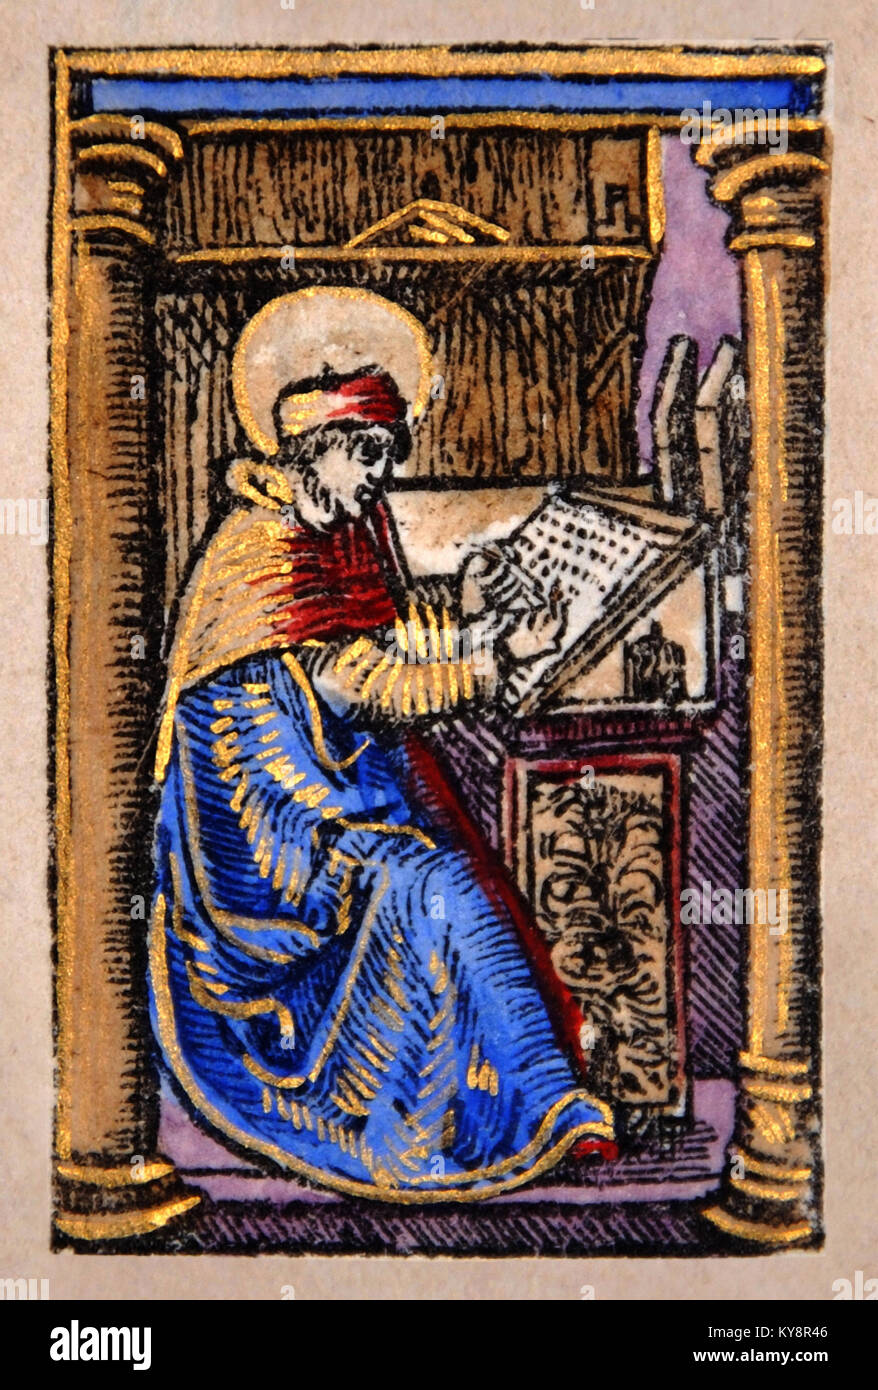 Illustration of a scribe from a Title Page in a Facsimile of William Tyndale's 1525 edition of the English New Testament. From the Reed Rare Books Collection in Dunedin, New Zealand. Stock Photo